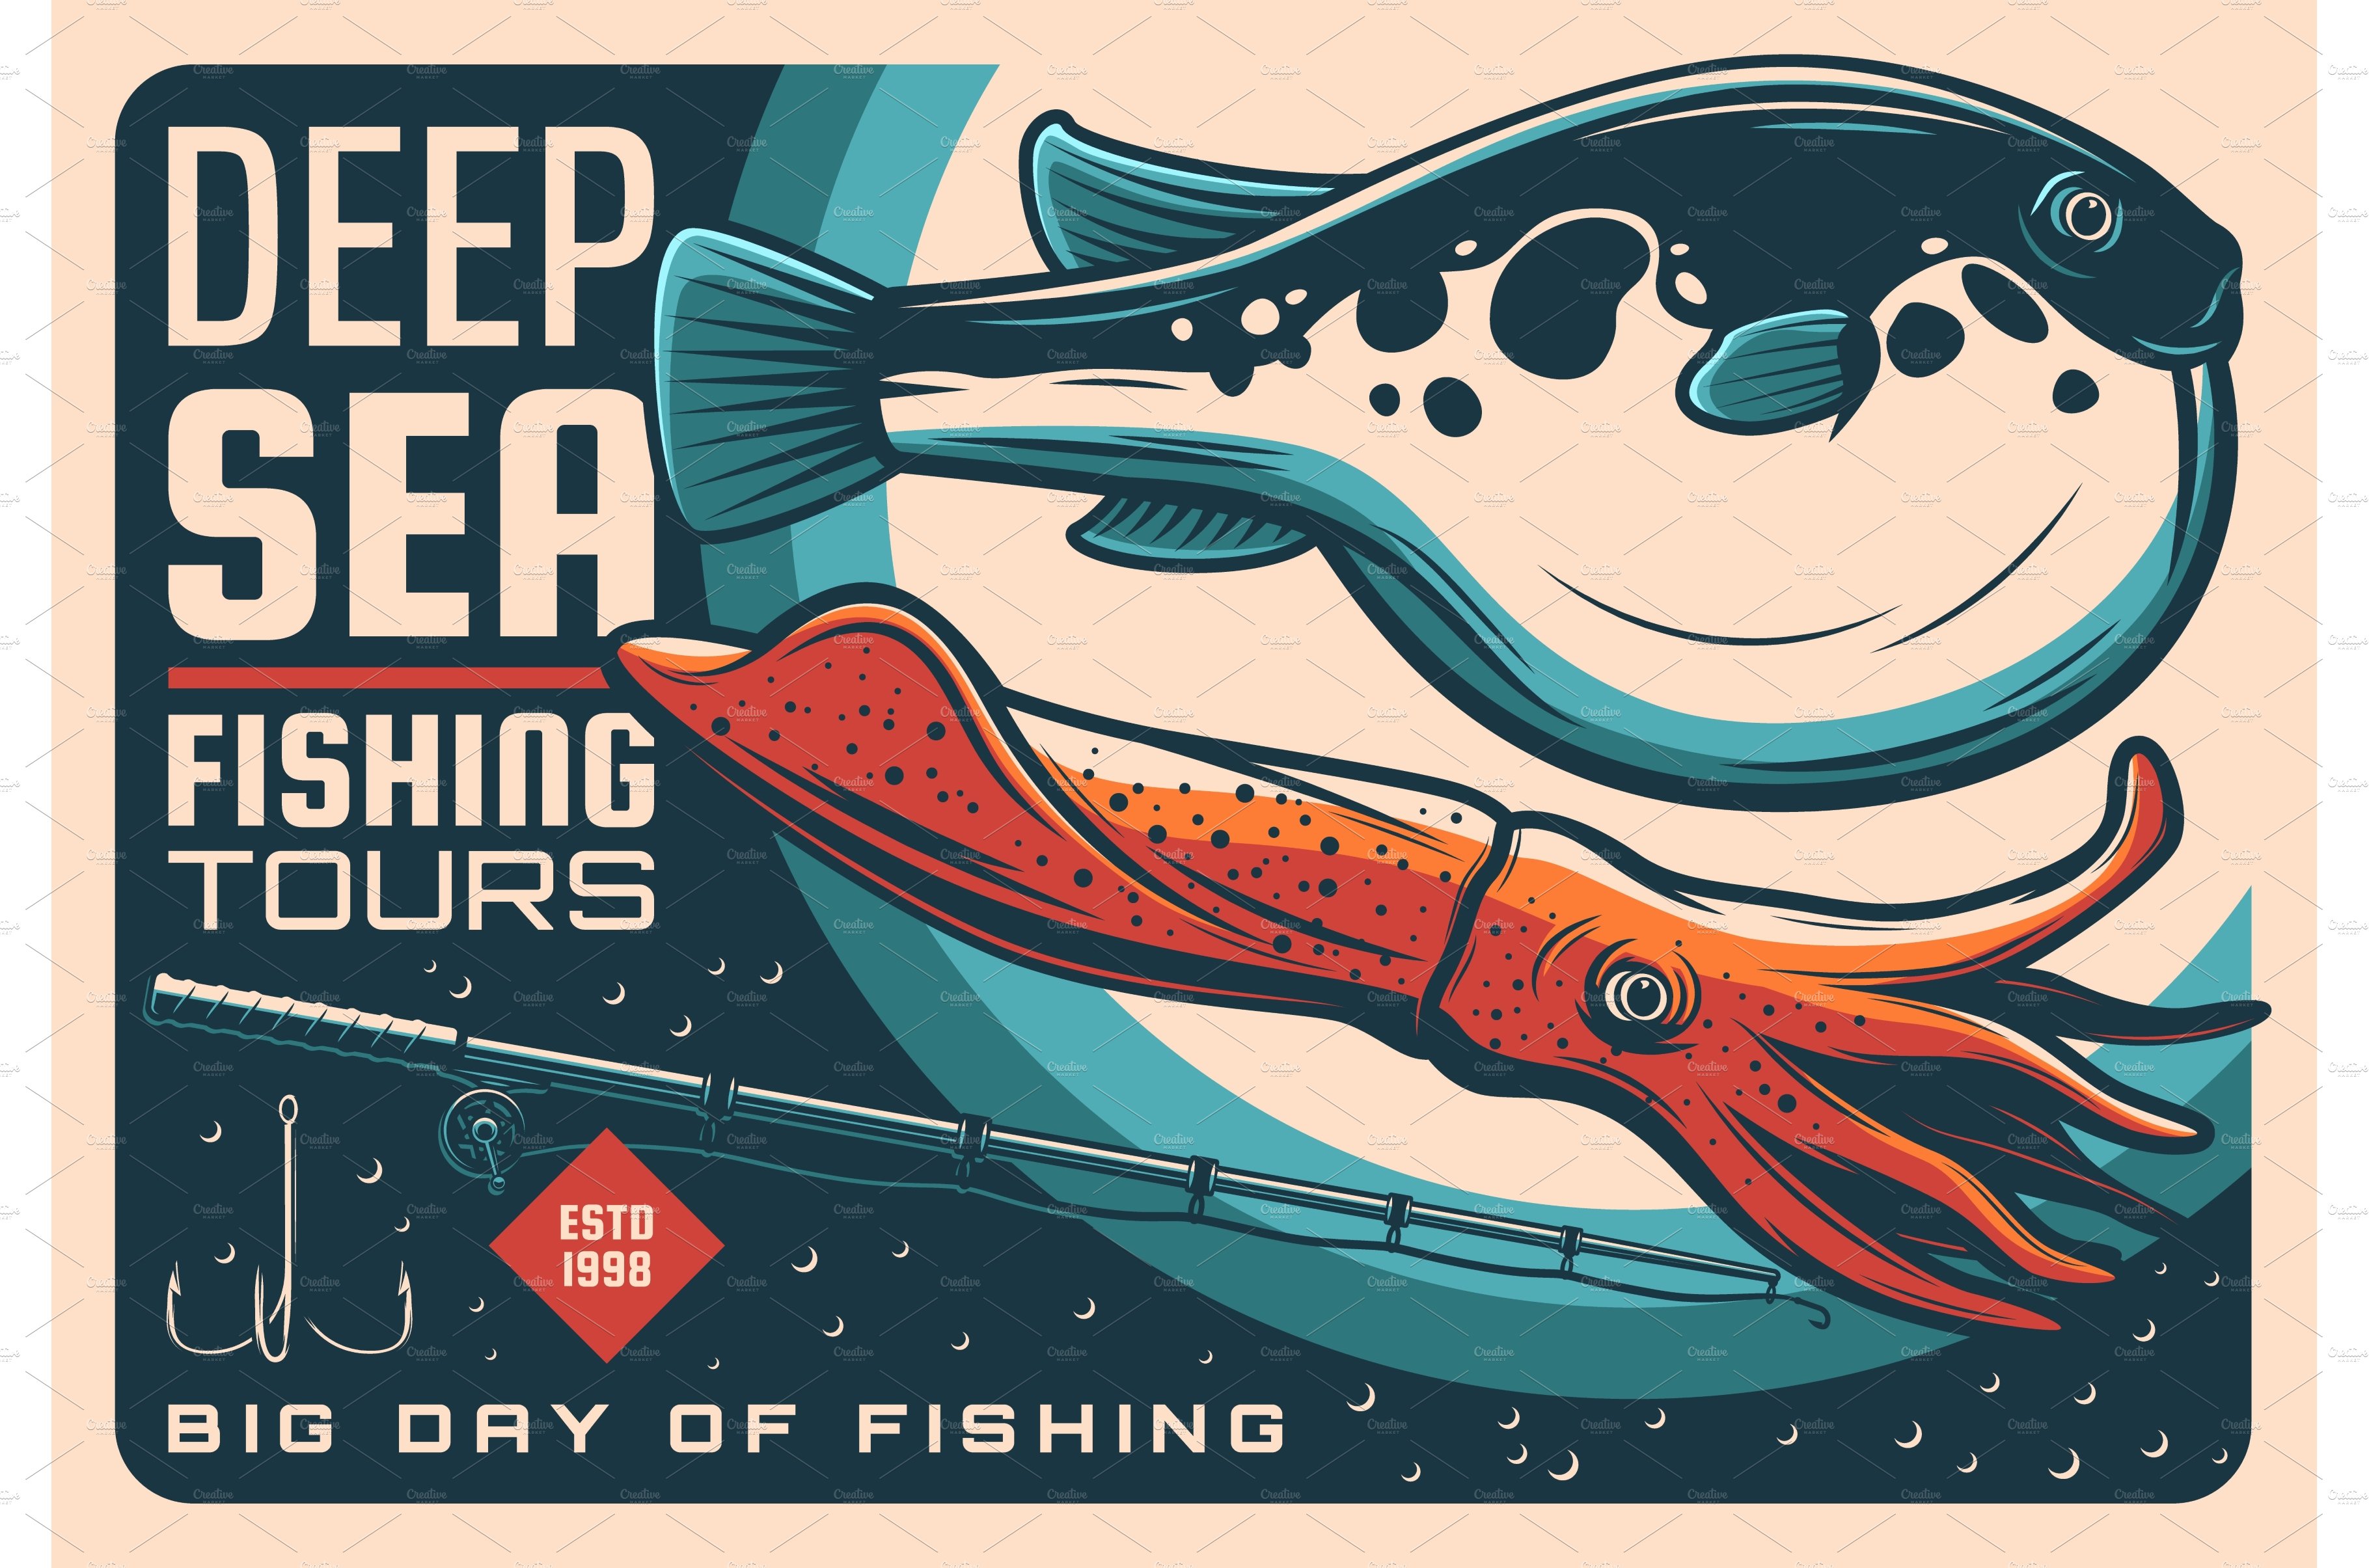 Fishing sport, fugu fish and squid cover image.